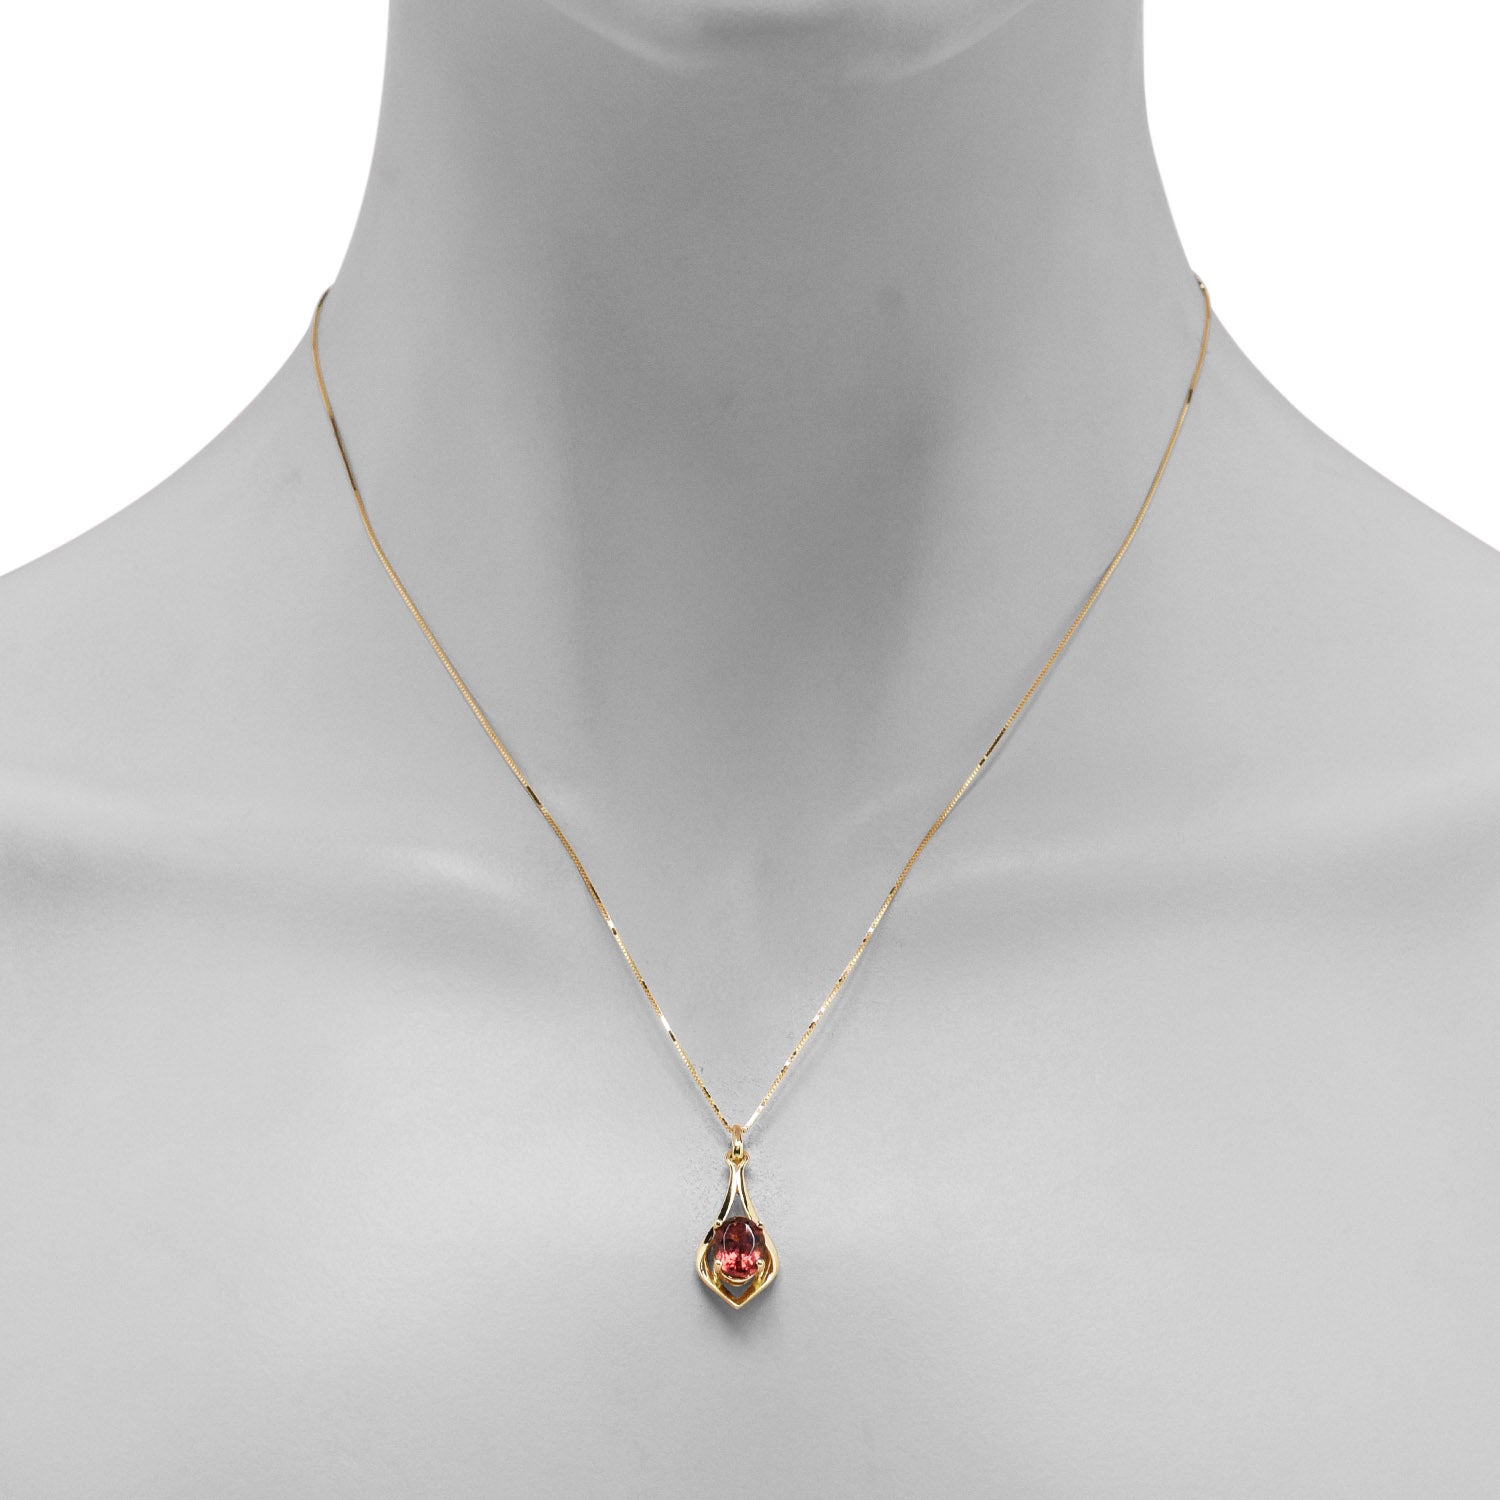 Maine Pink Tourmaline Necklace in 14kt Yellow Gold